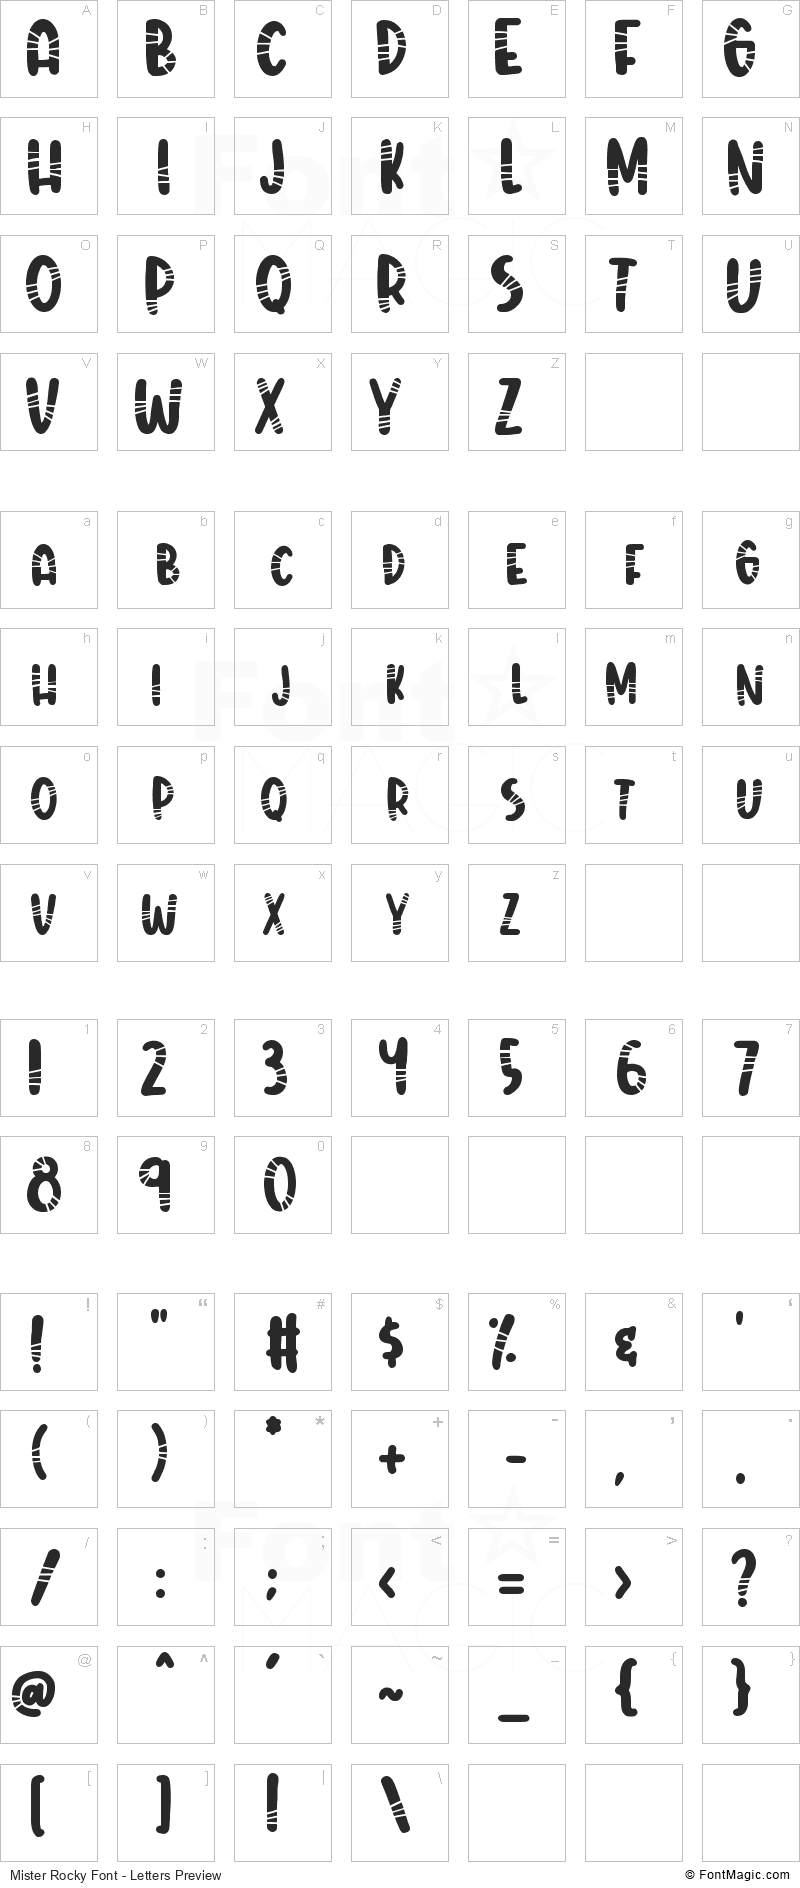 Mister Rocky Font - All Latters Preview Chart